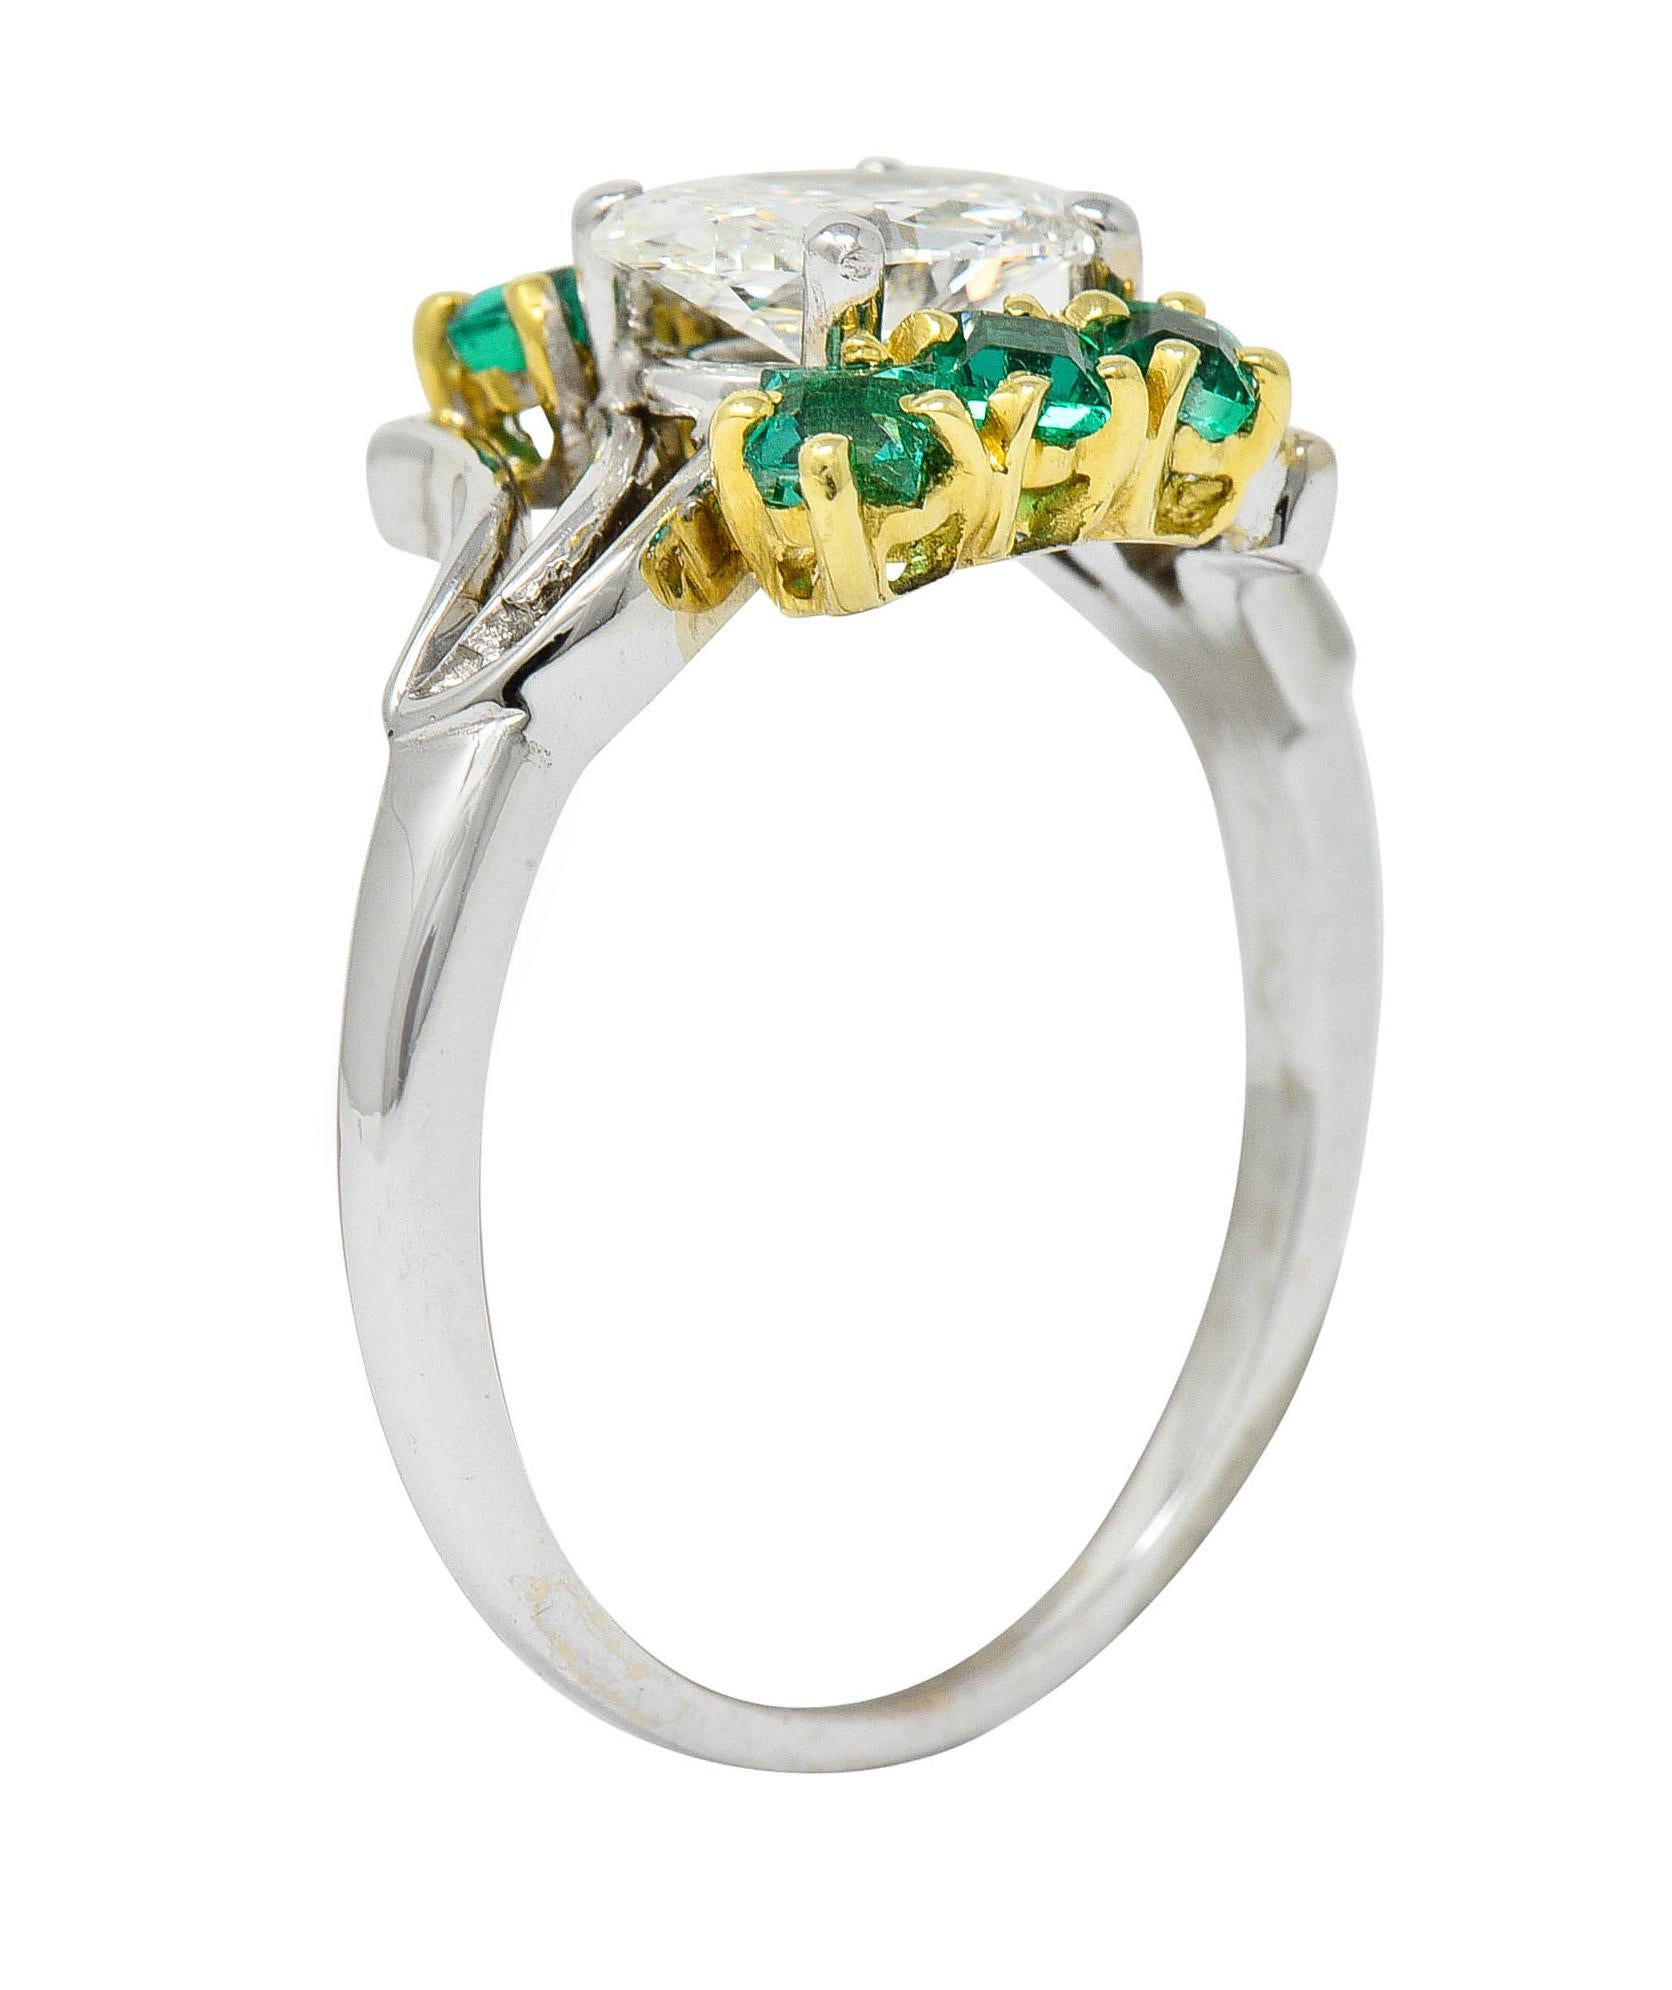 Bypass style ring centers an oval brilliant cut diamond weighing 1.16 carat - I color with VS1 clarity

Set East to West and flanked by rectangular cut emeralds weighing in total approximately 0.60 carat

Set in yellow gold with well matched vibrant